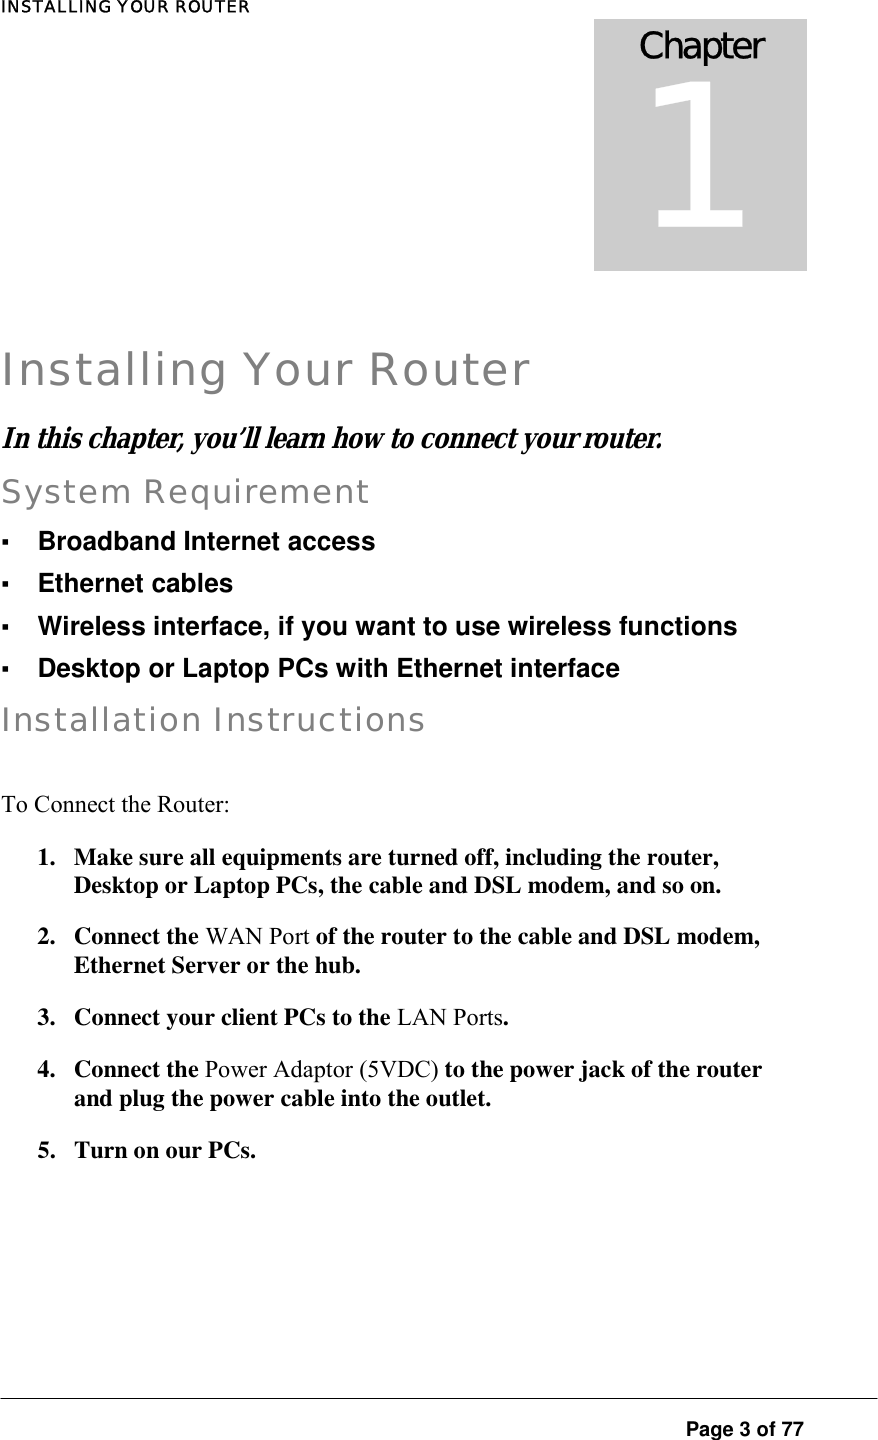 INSTALLING YOUR ROUTER  Page 3 of 77  Installing Your Router In this chapter, you’ll learn how to connect your router.  System Requirement ▪ Broadband Internet access ▪ Ethernet cables ▪ Wireless interface, if you want to use wireless functions ▪ Desktop or Laptop PCs with Ethernet interface Installation Instructions To Connect the Router:  1.  Make sure all equipments are turned off, including the router, Desktop or Laptop PCs, the cable and DSL modem, and so on.  2. Connect the WAN Port of the router to the cable and DSL modem, Ethernet Server or the hub.  3.  Connect your client PCs to the LAN Ports.  4. Connect the Power Adaptor (5VDC) to the power jack of the router and plug the power cable into the outlet.  5.  Turn on our PCs. Chapter 1 